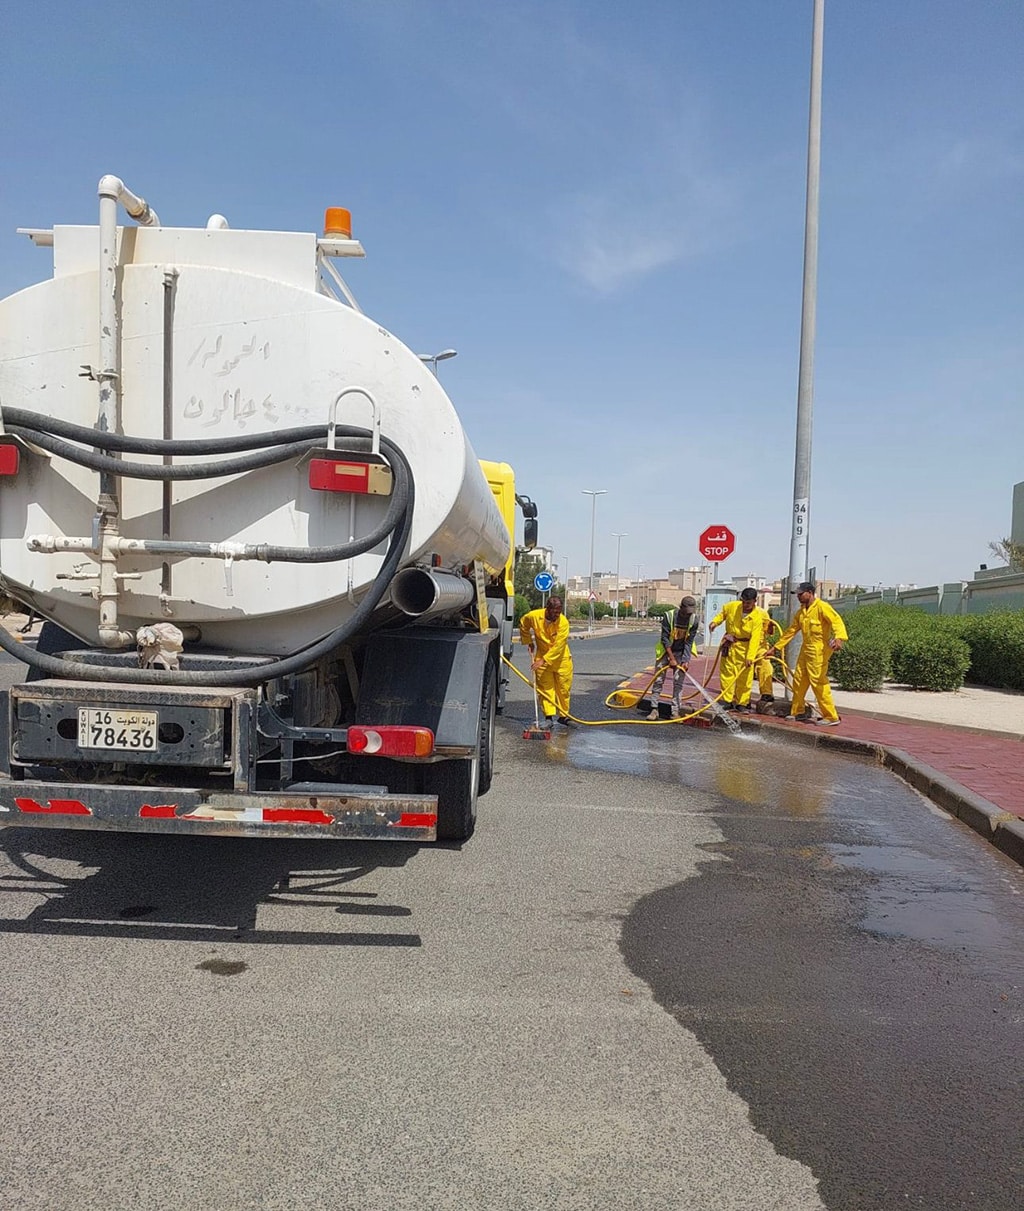 Kuwait Municipality dispatches 1,230 sanitation workers during election week